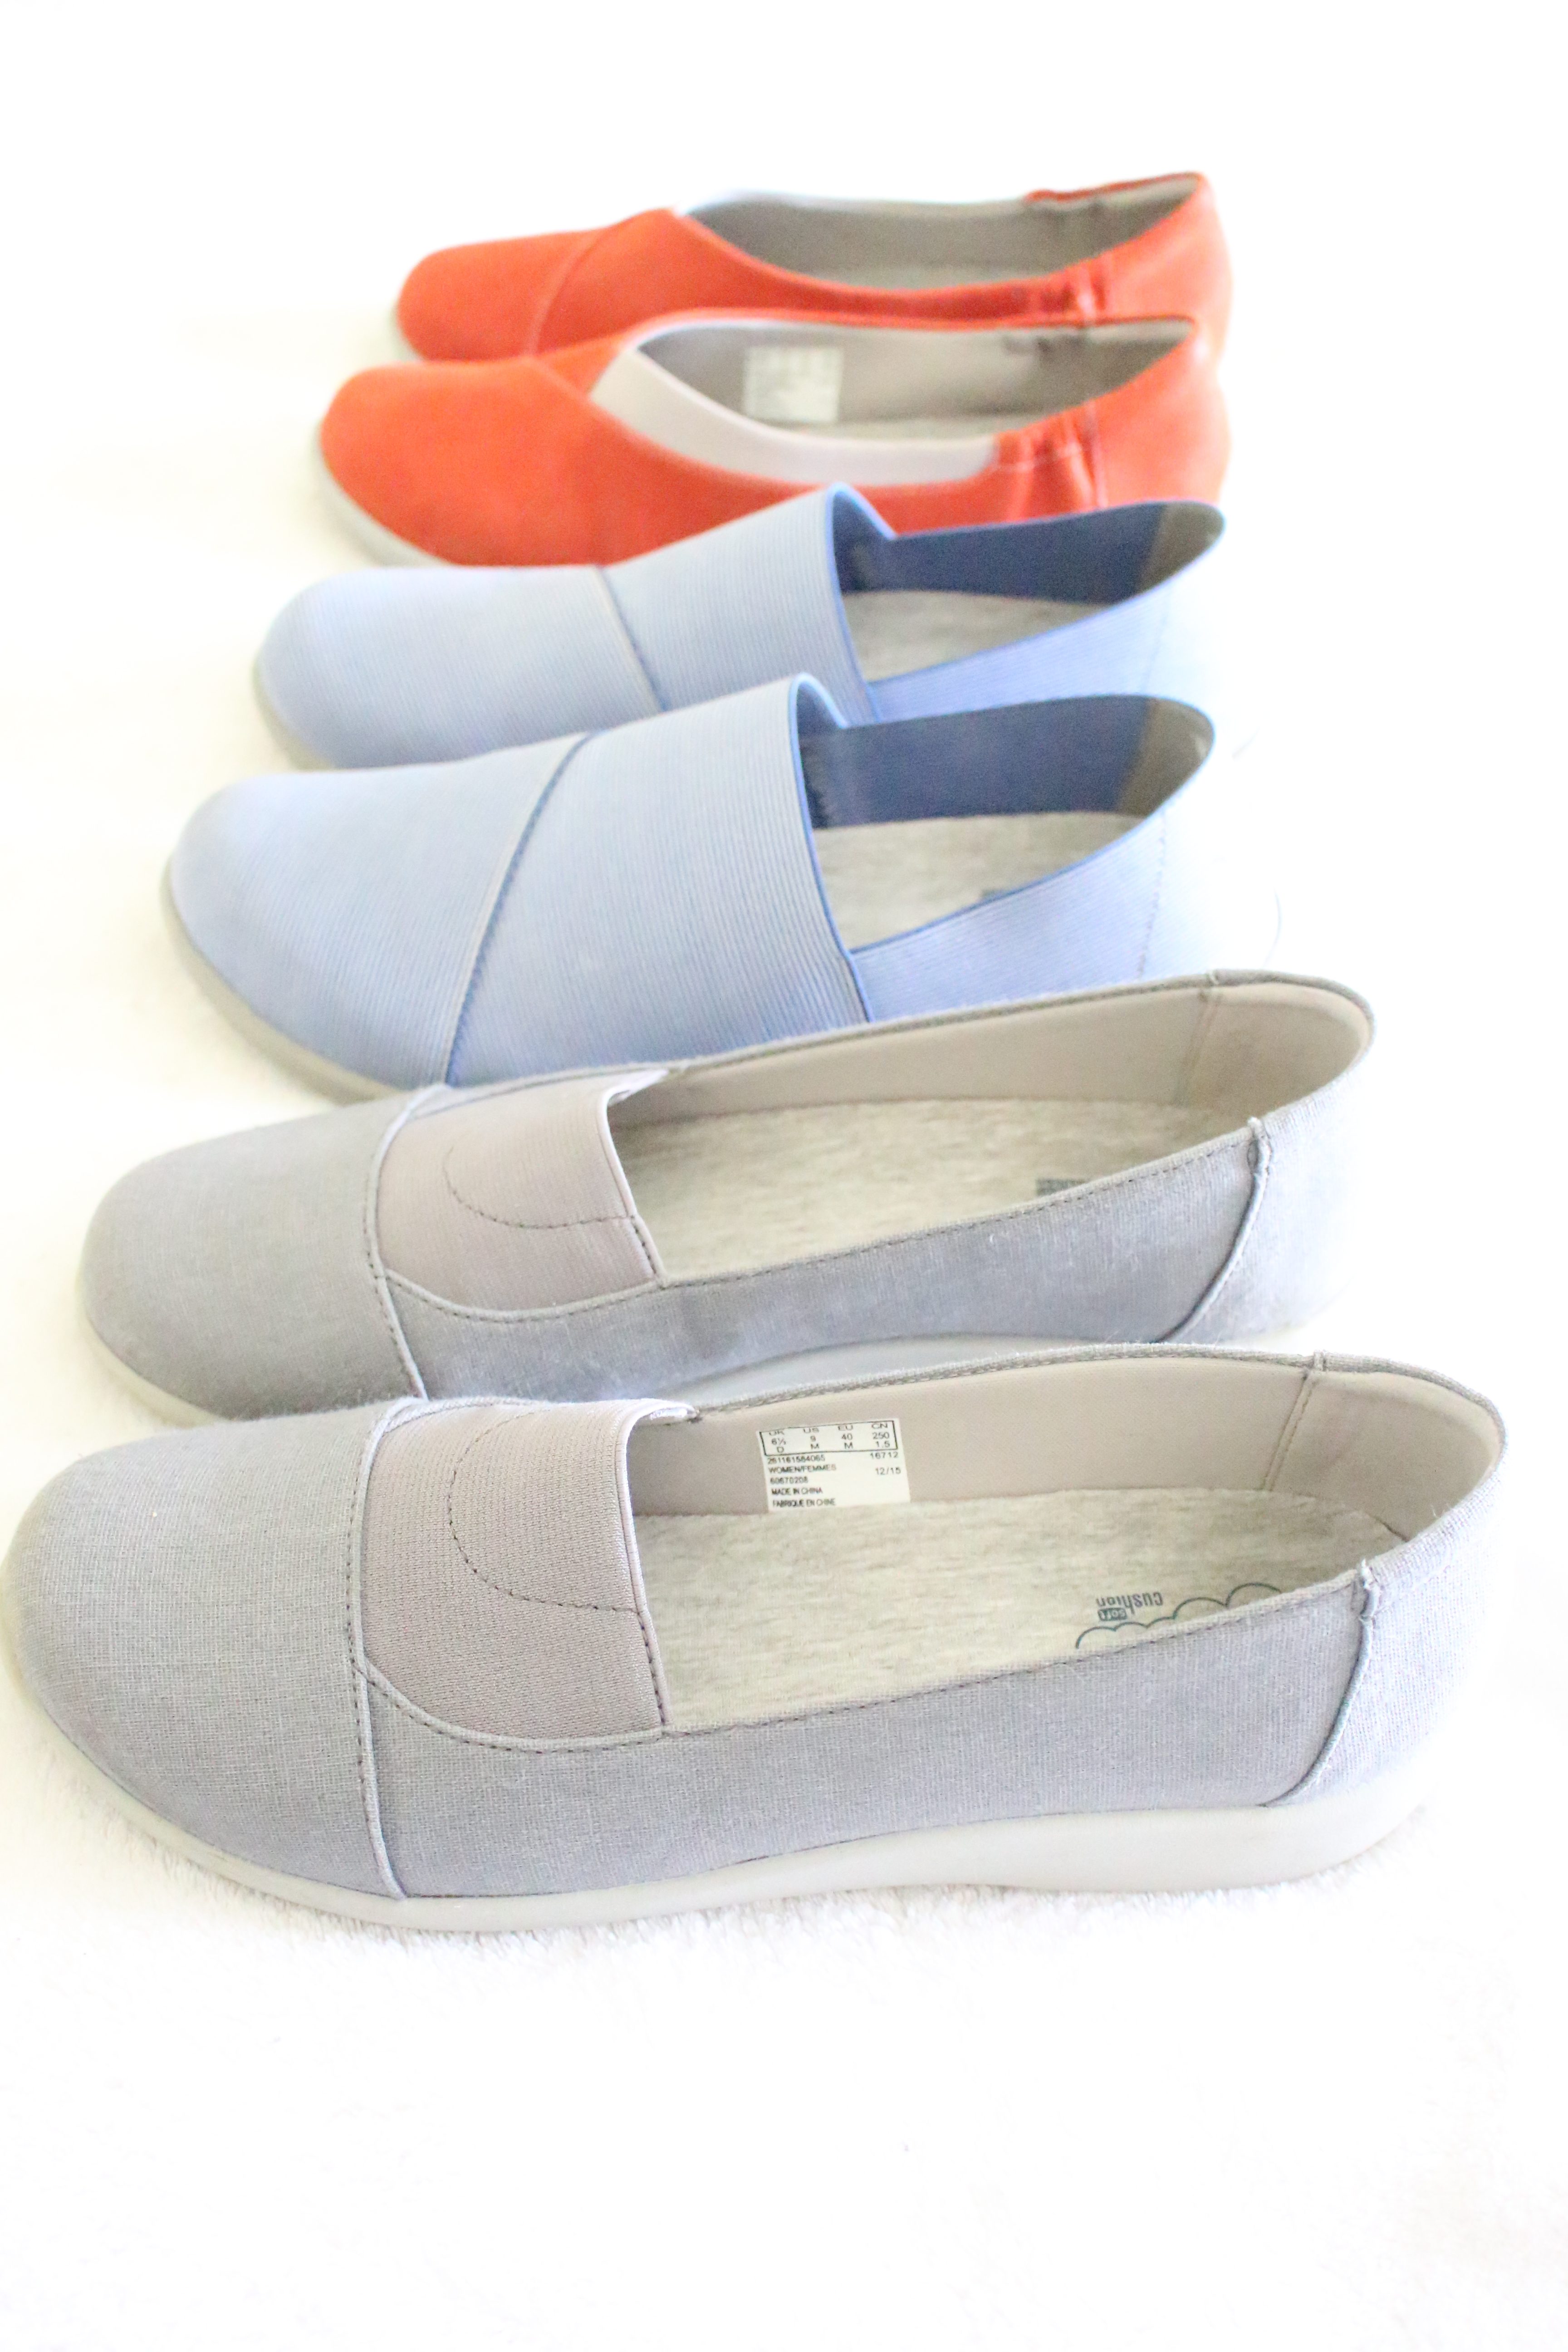 Clarks Cloudsteppers are comfy and versatile shoes by www.whitecottagehomeandliving.com